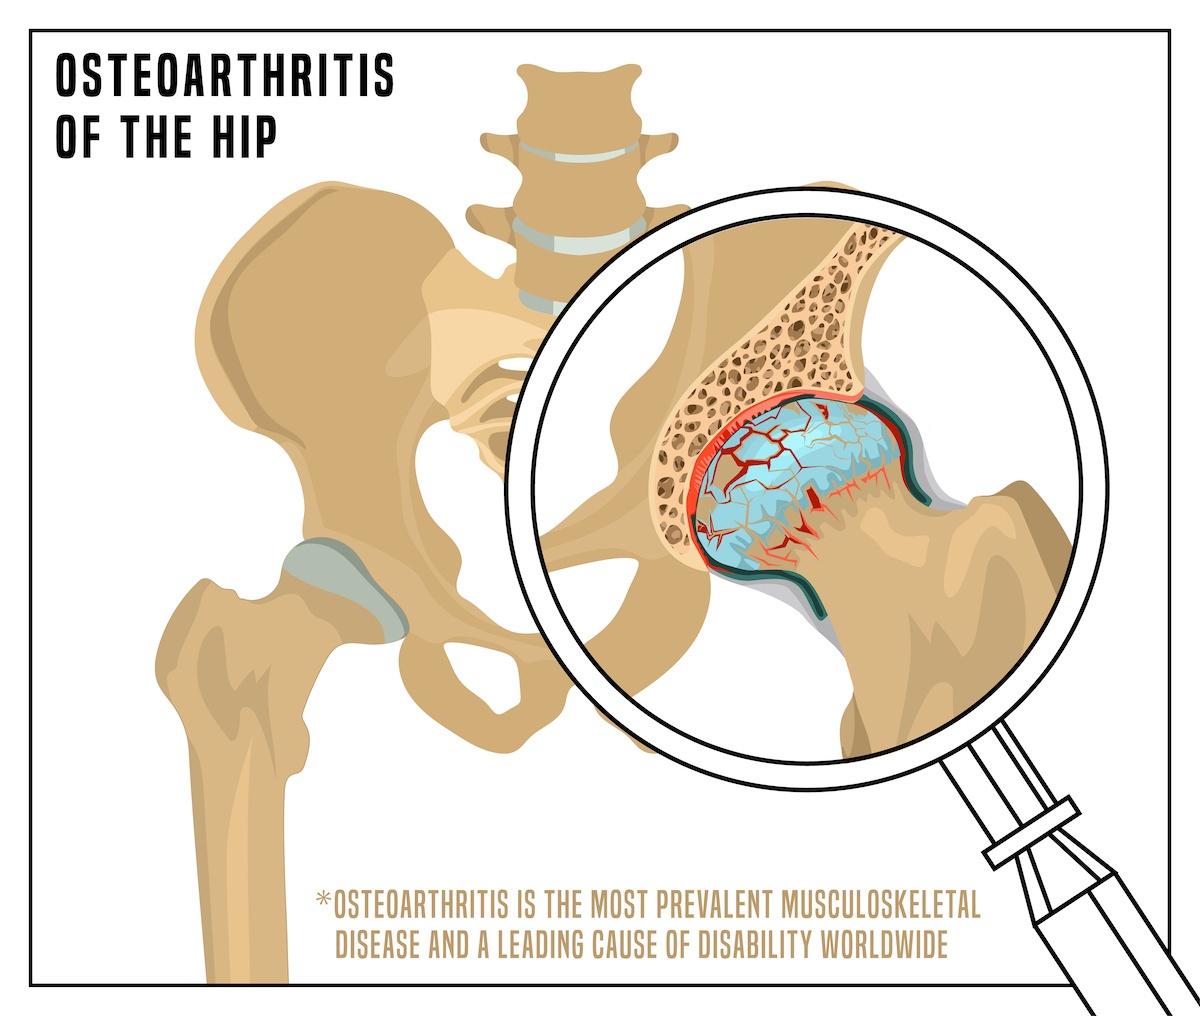 An illustration showing the worn cartilage caused byosteoarthritis of the hip.